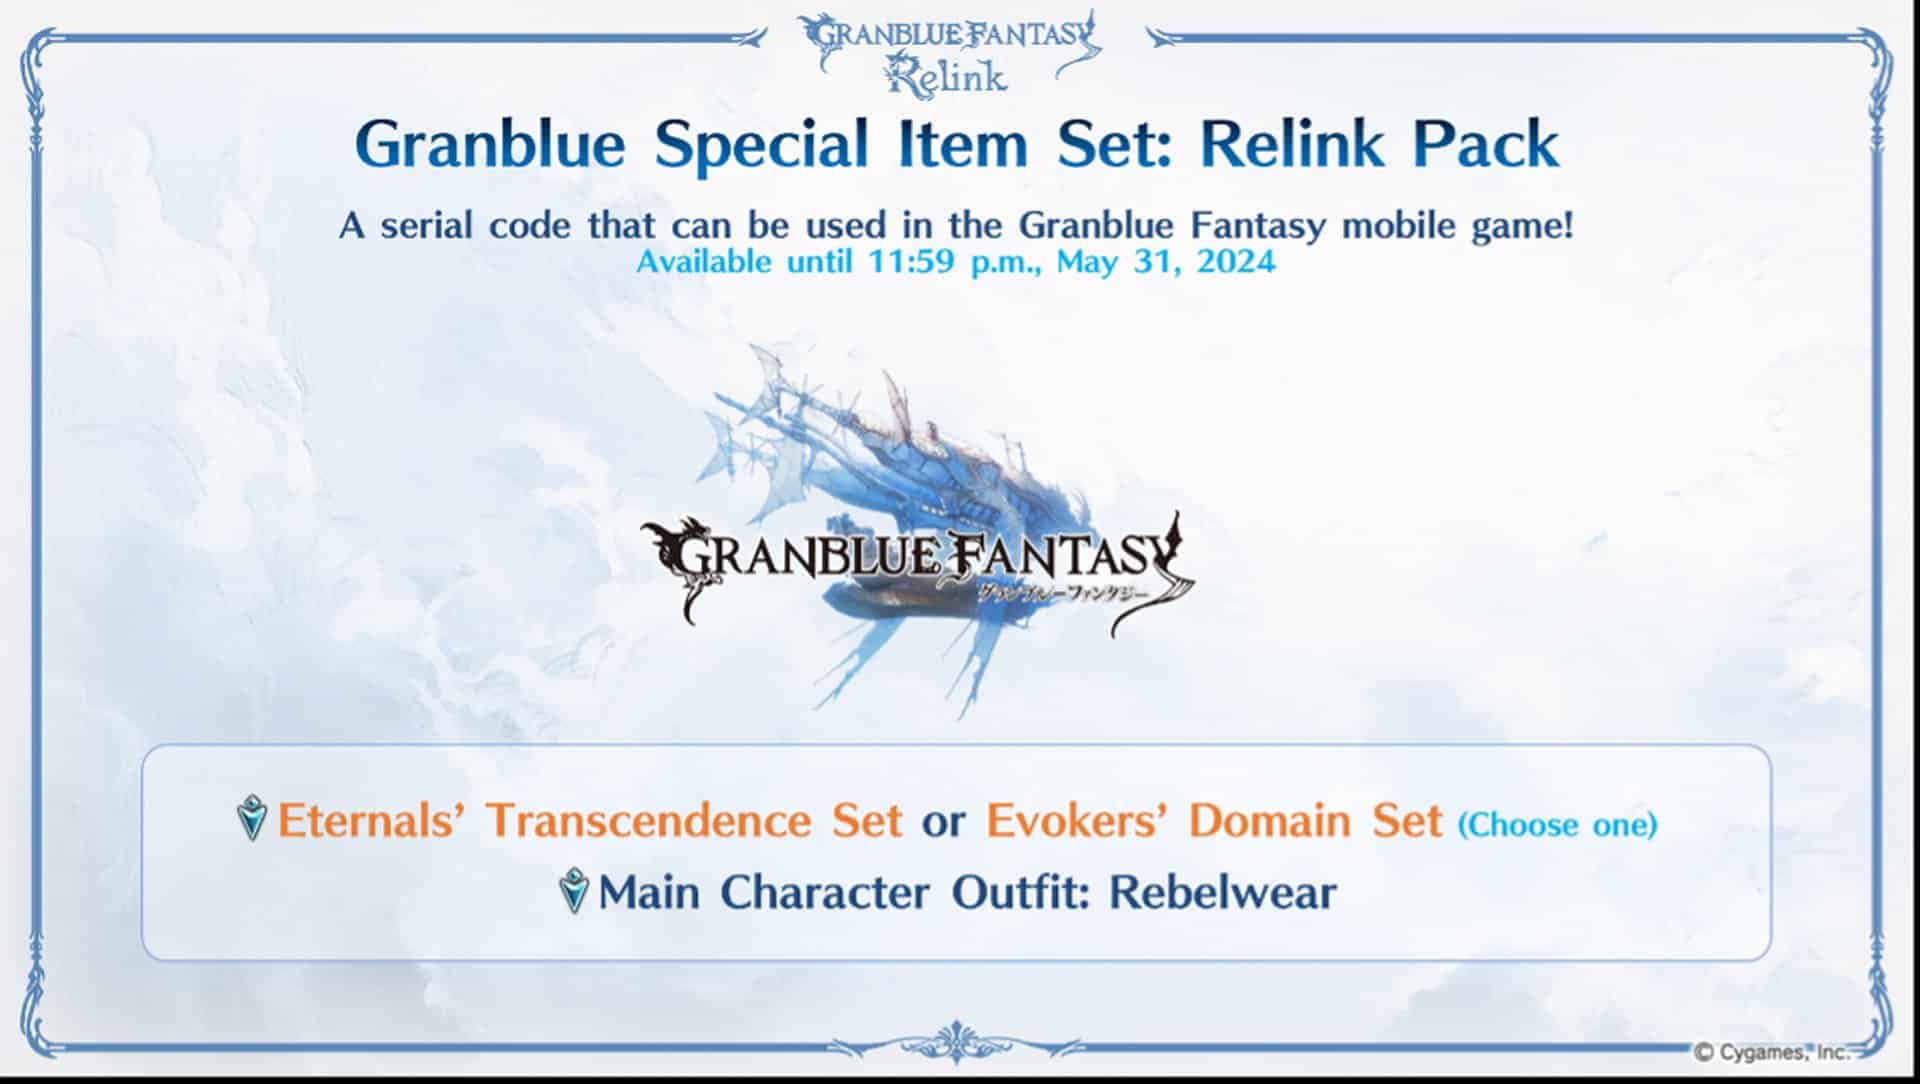 Granblue Fantasy Relink Releases Feb. 1, 2024; Different Editions